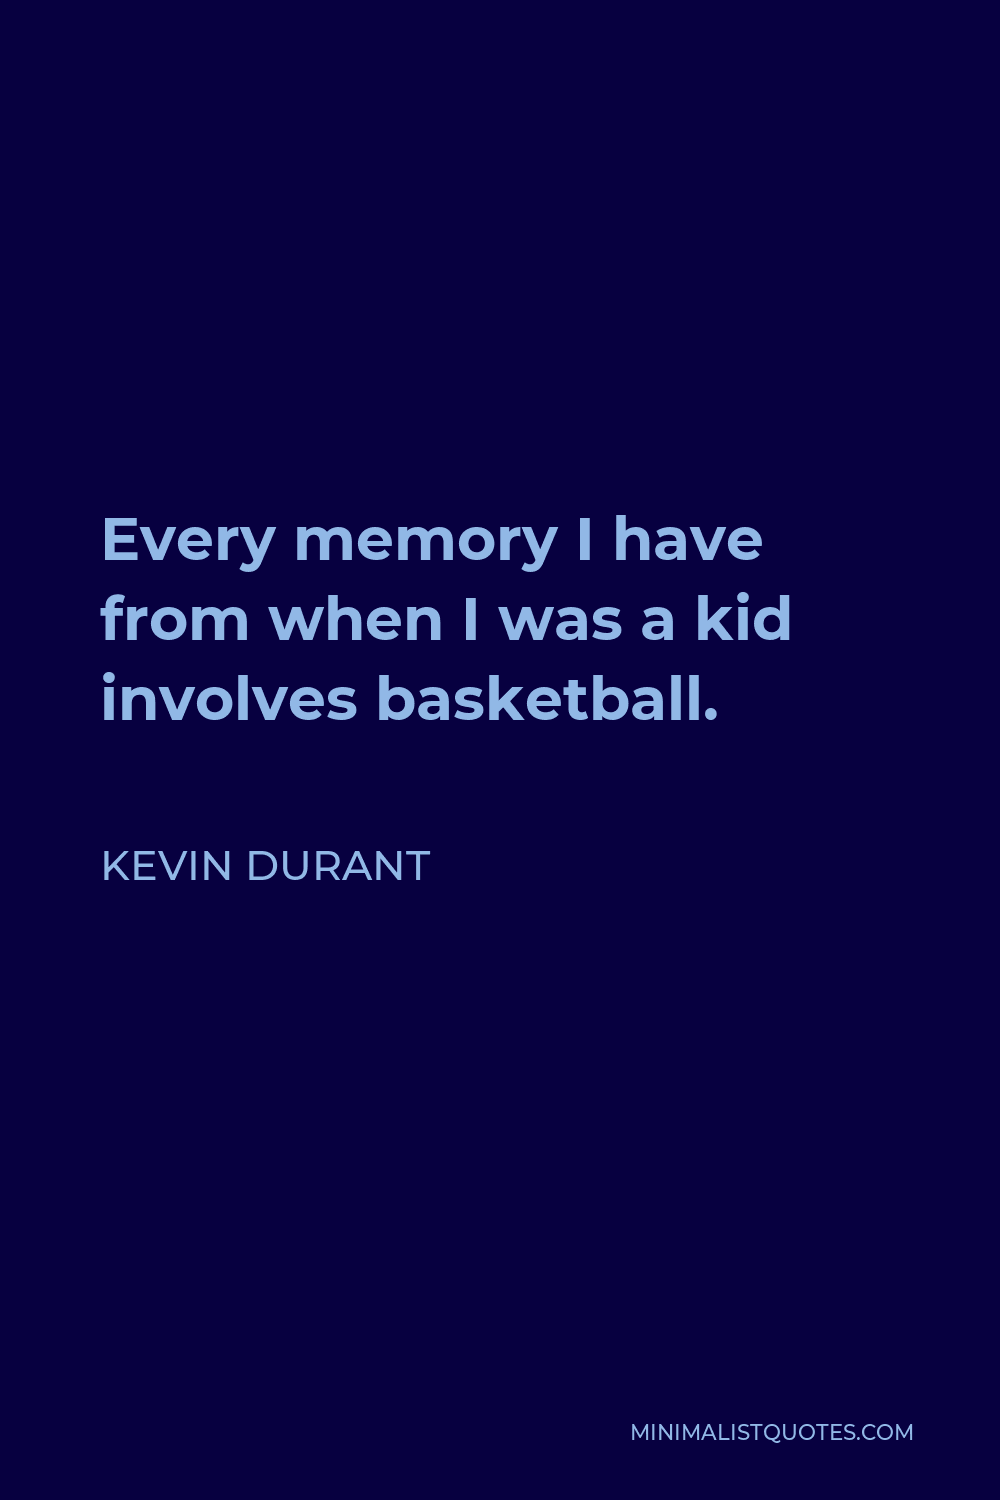 Kevin Durant Quote - Every memory I have from when I was a kid involves basketball.